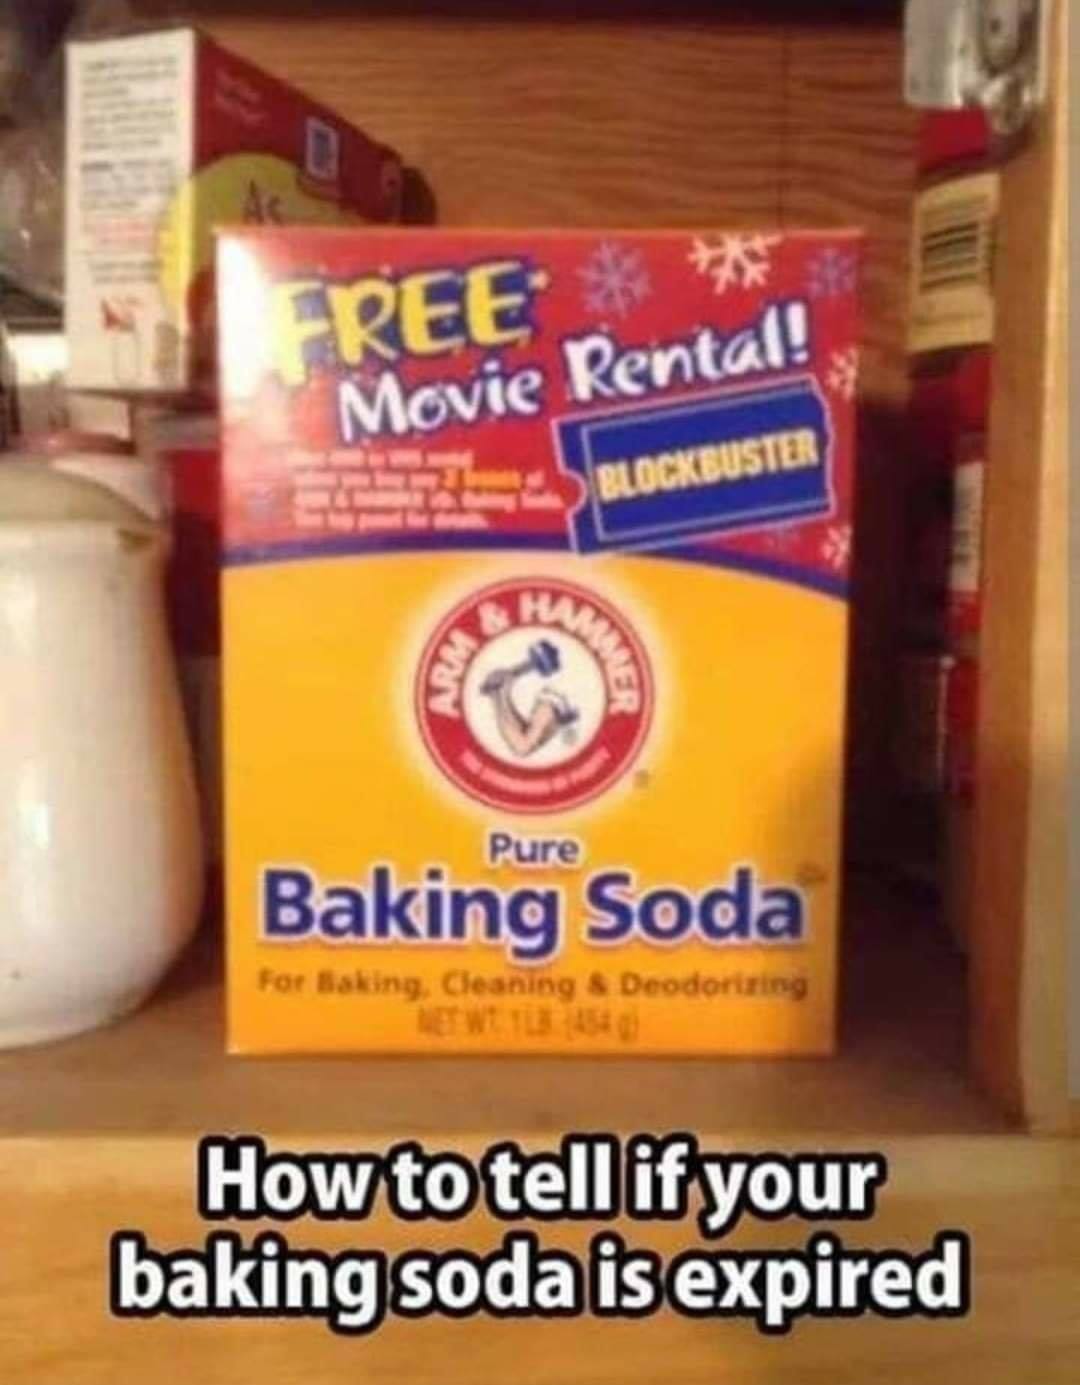 baking soda meme - Free Movie Rental! Blockbuster Pure Baking Soda For liking, Cleaning & Deodorizing How to tell if your baking soda is expired